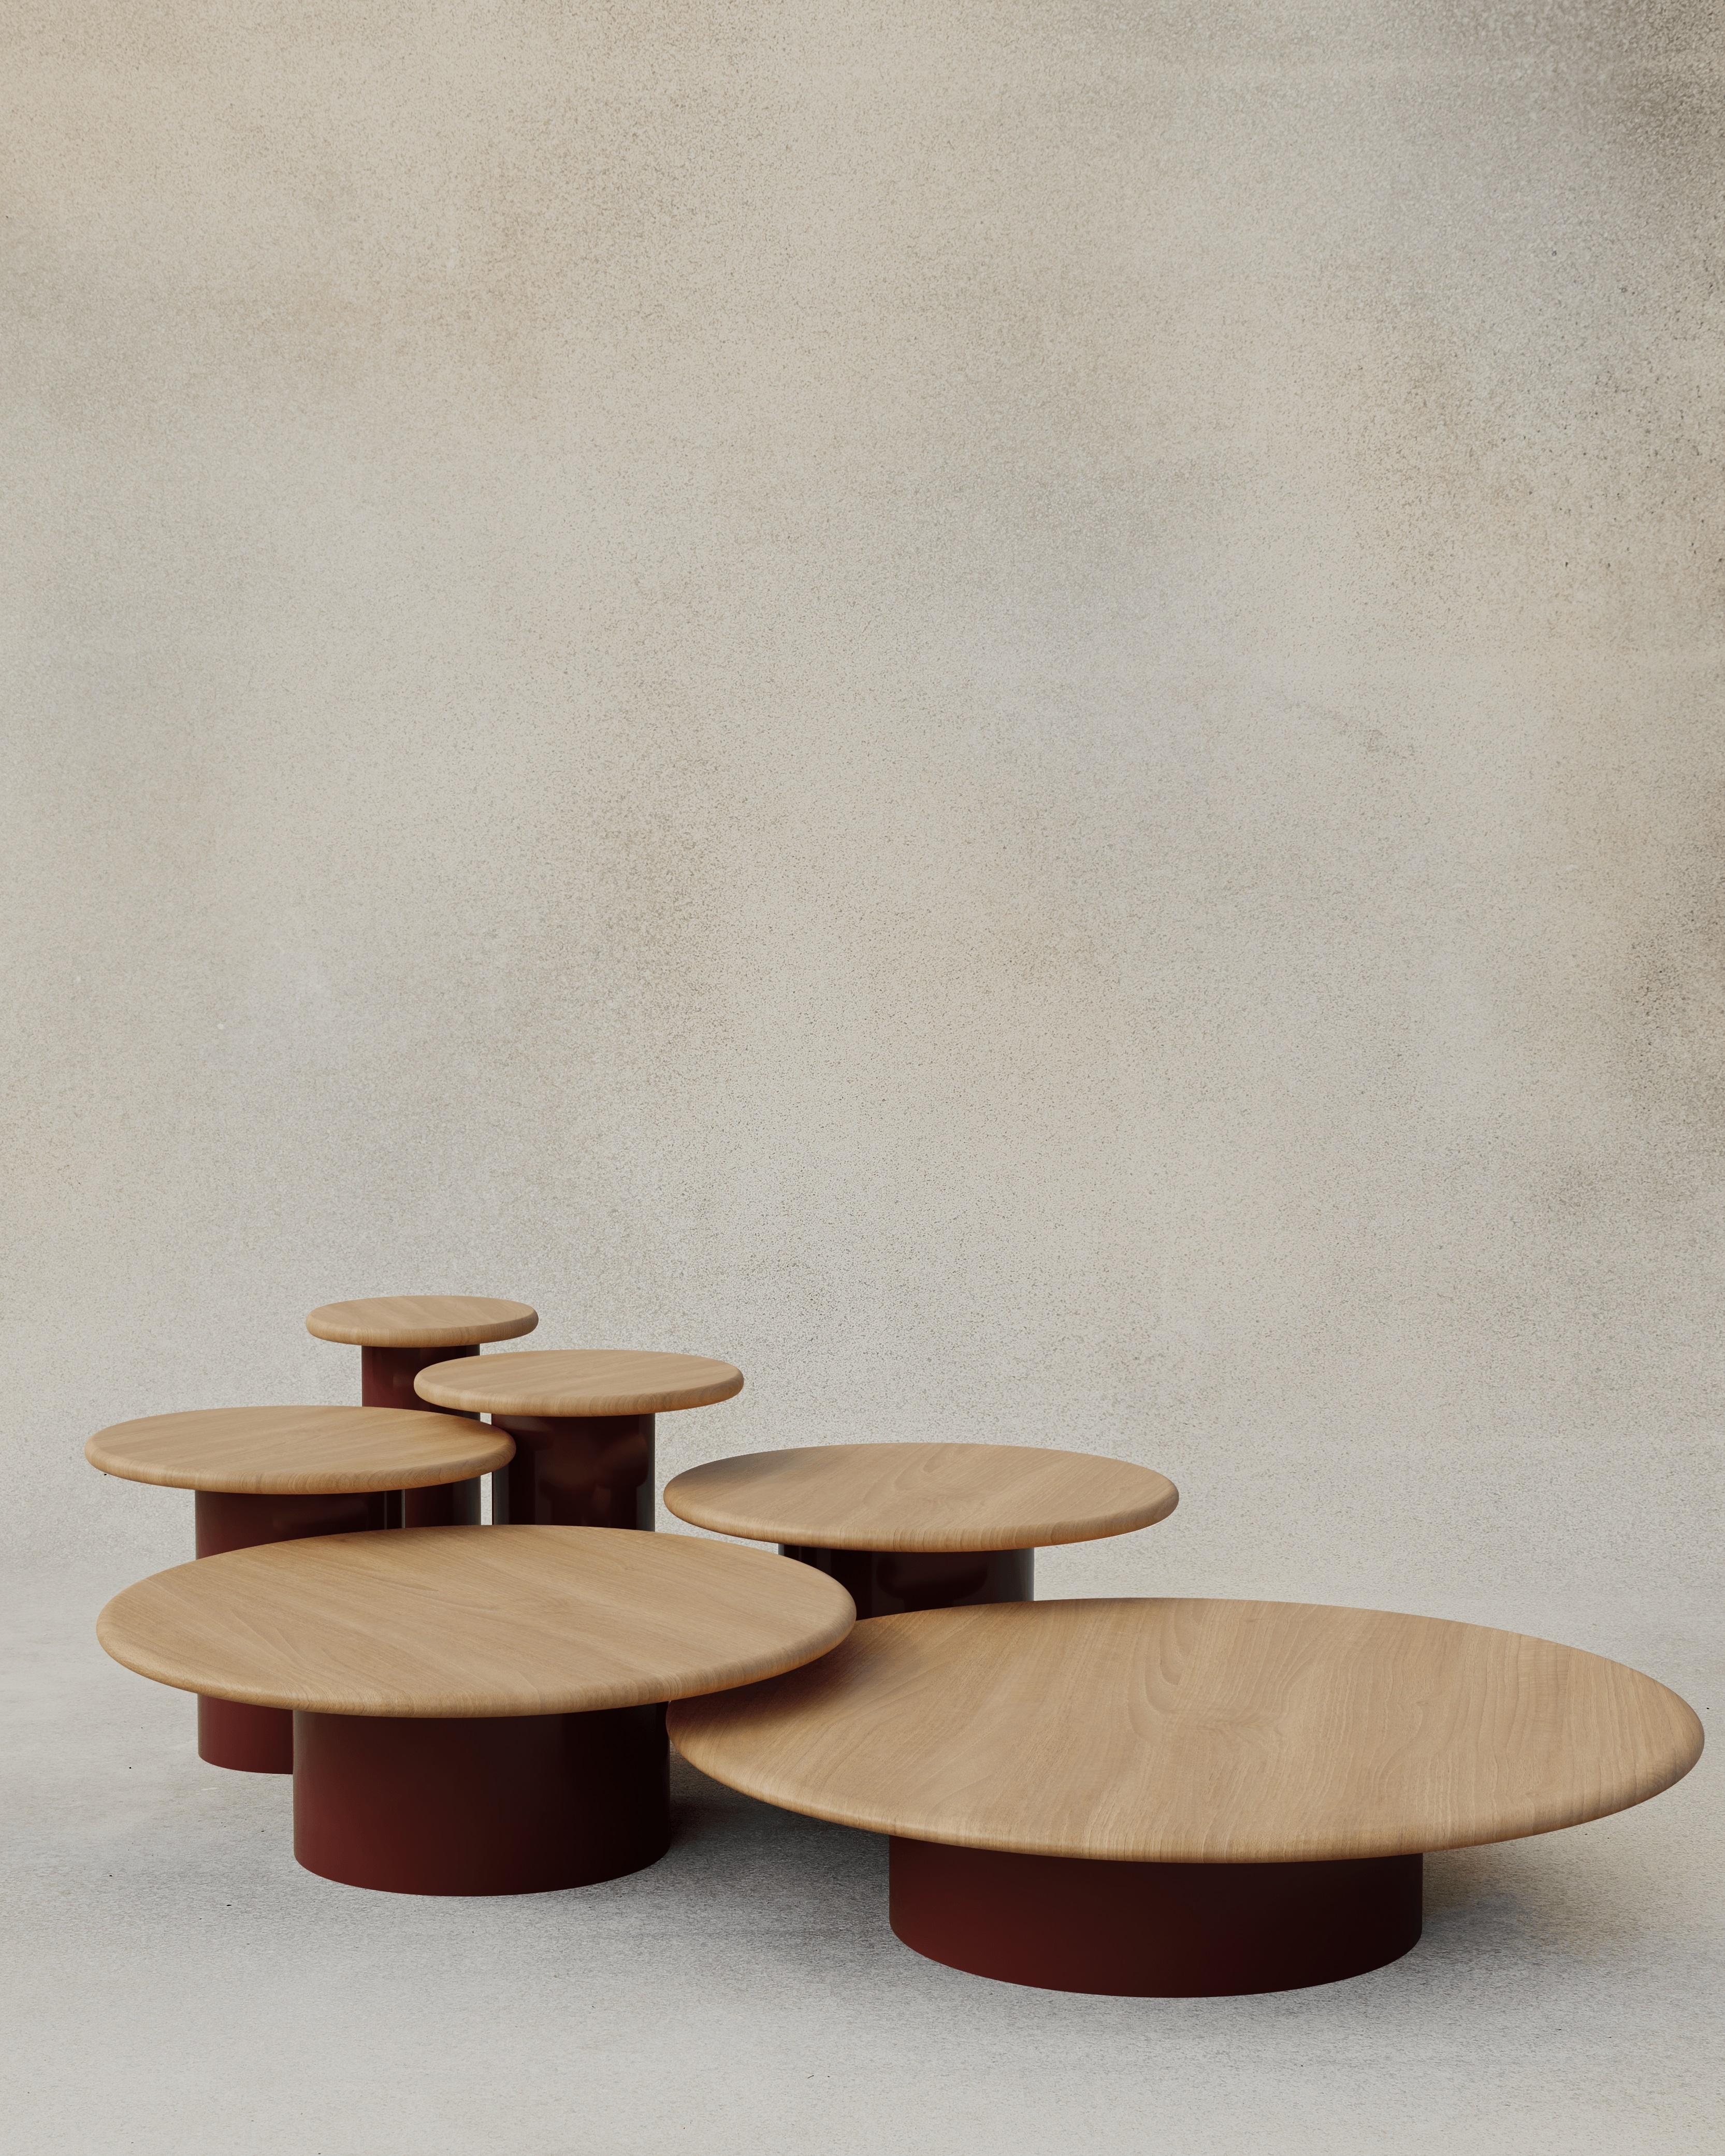 With their circular profiles, varying proportions and potential to be nested, these versatile tables evoke the pattern of raindrops in a POOL of water when placed together.

Bought as a full set of 300, 400, 500, 600, 800 and 1000, we add a 10%